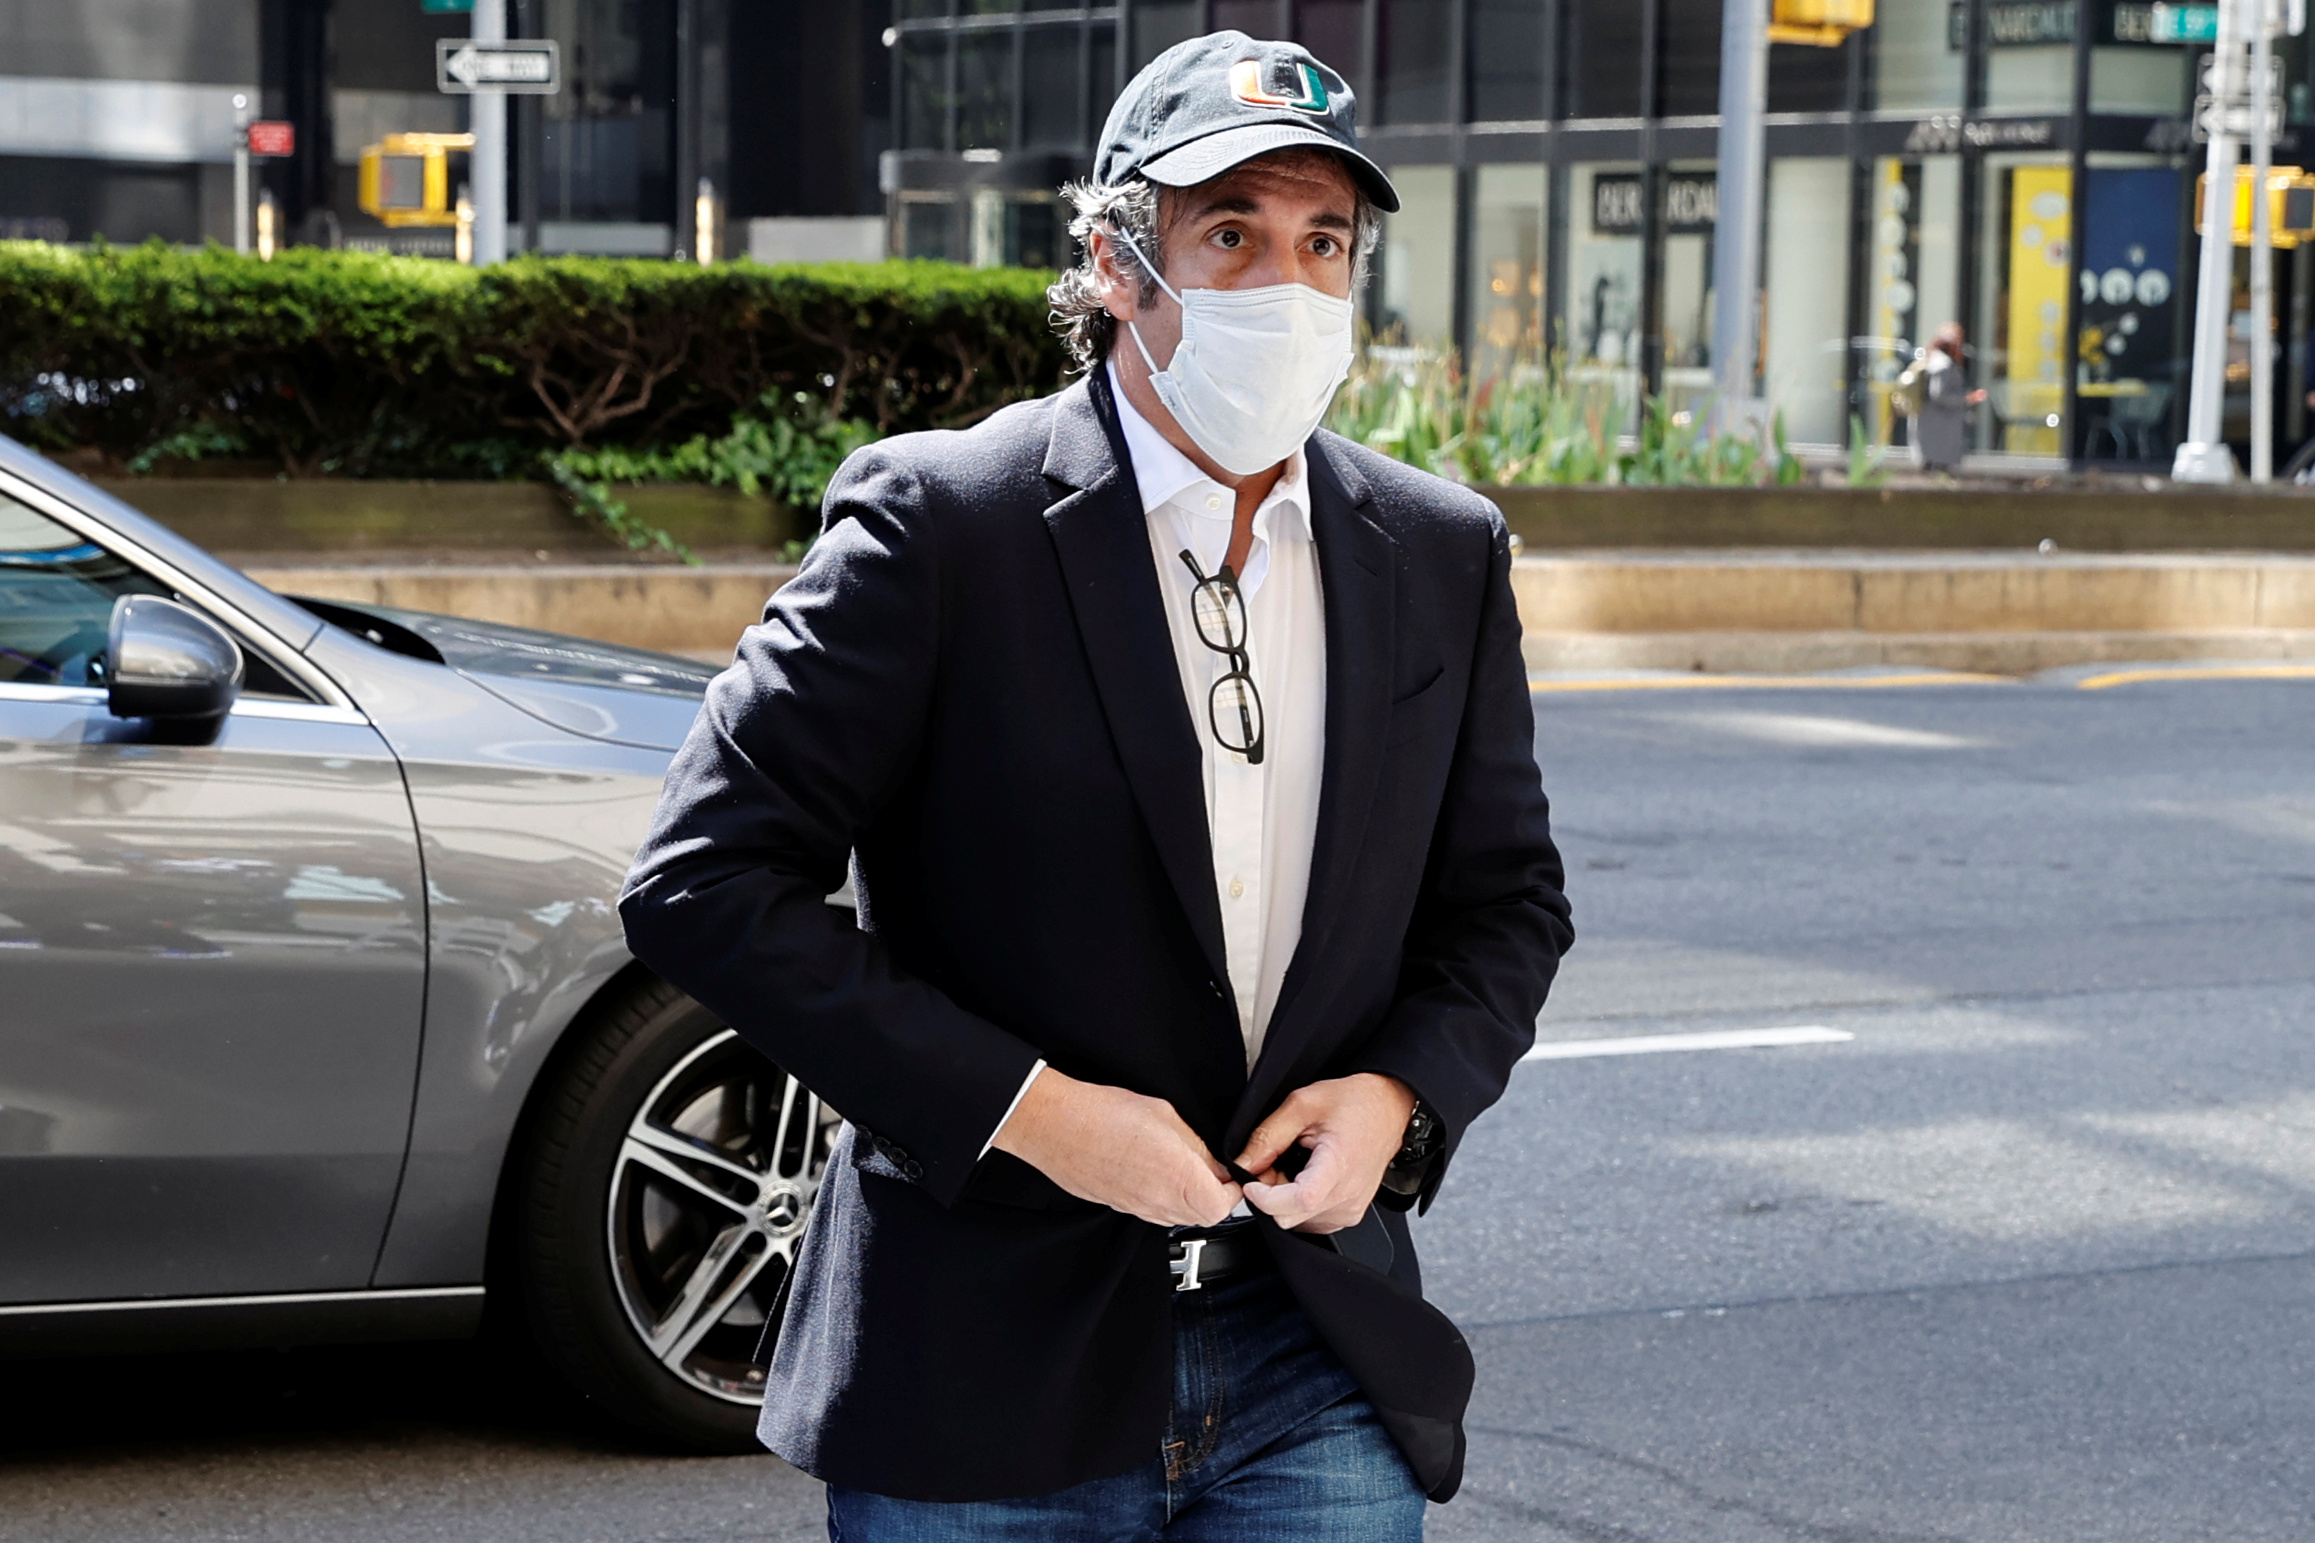 PHOTO: Michael Cohen, the former personal lawyer for U.S. President Donald Trump arrives at his Manhattan apartment after being released from federal prison to serve the remainder of his sentence under home confinement in New York City, May 21, 2020.